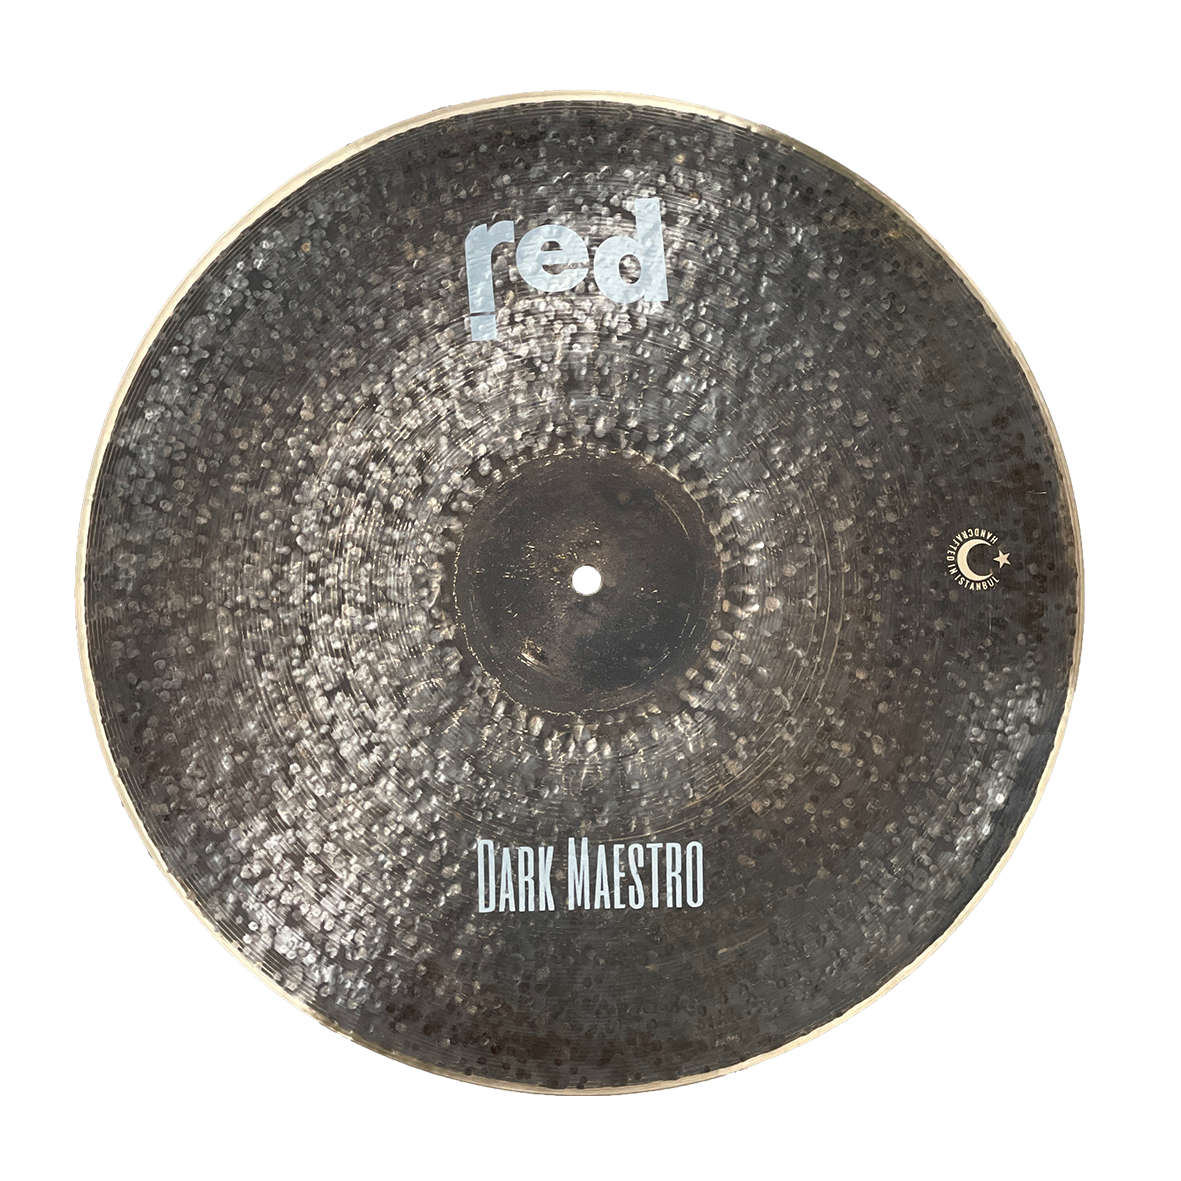 Red Cymbals Maestro Series Ride Cymbal